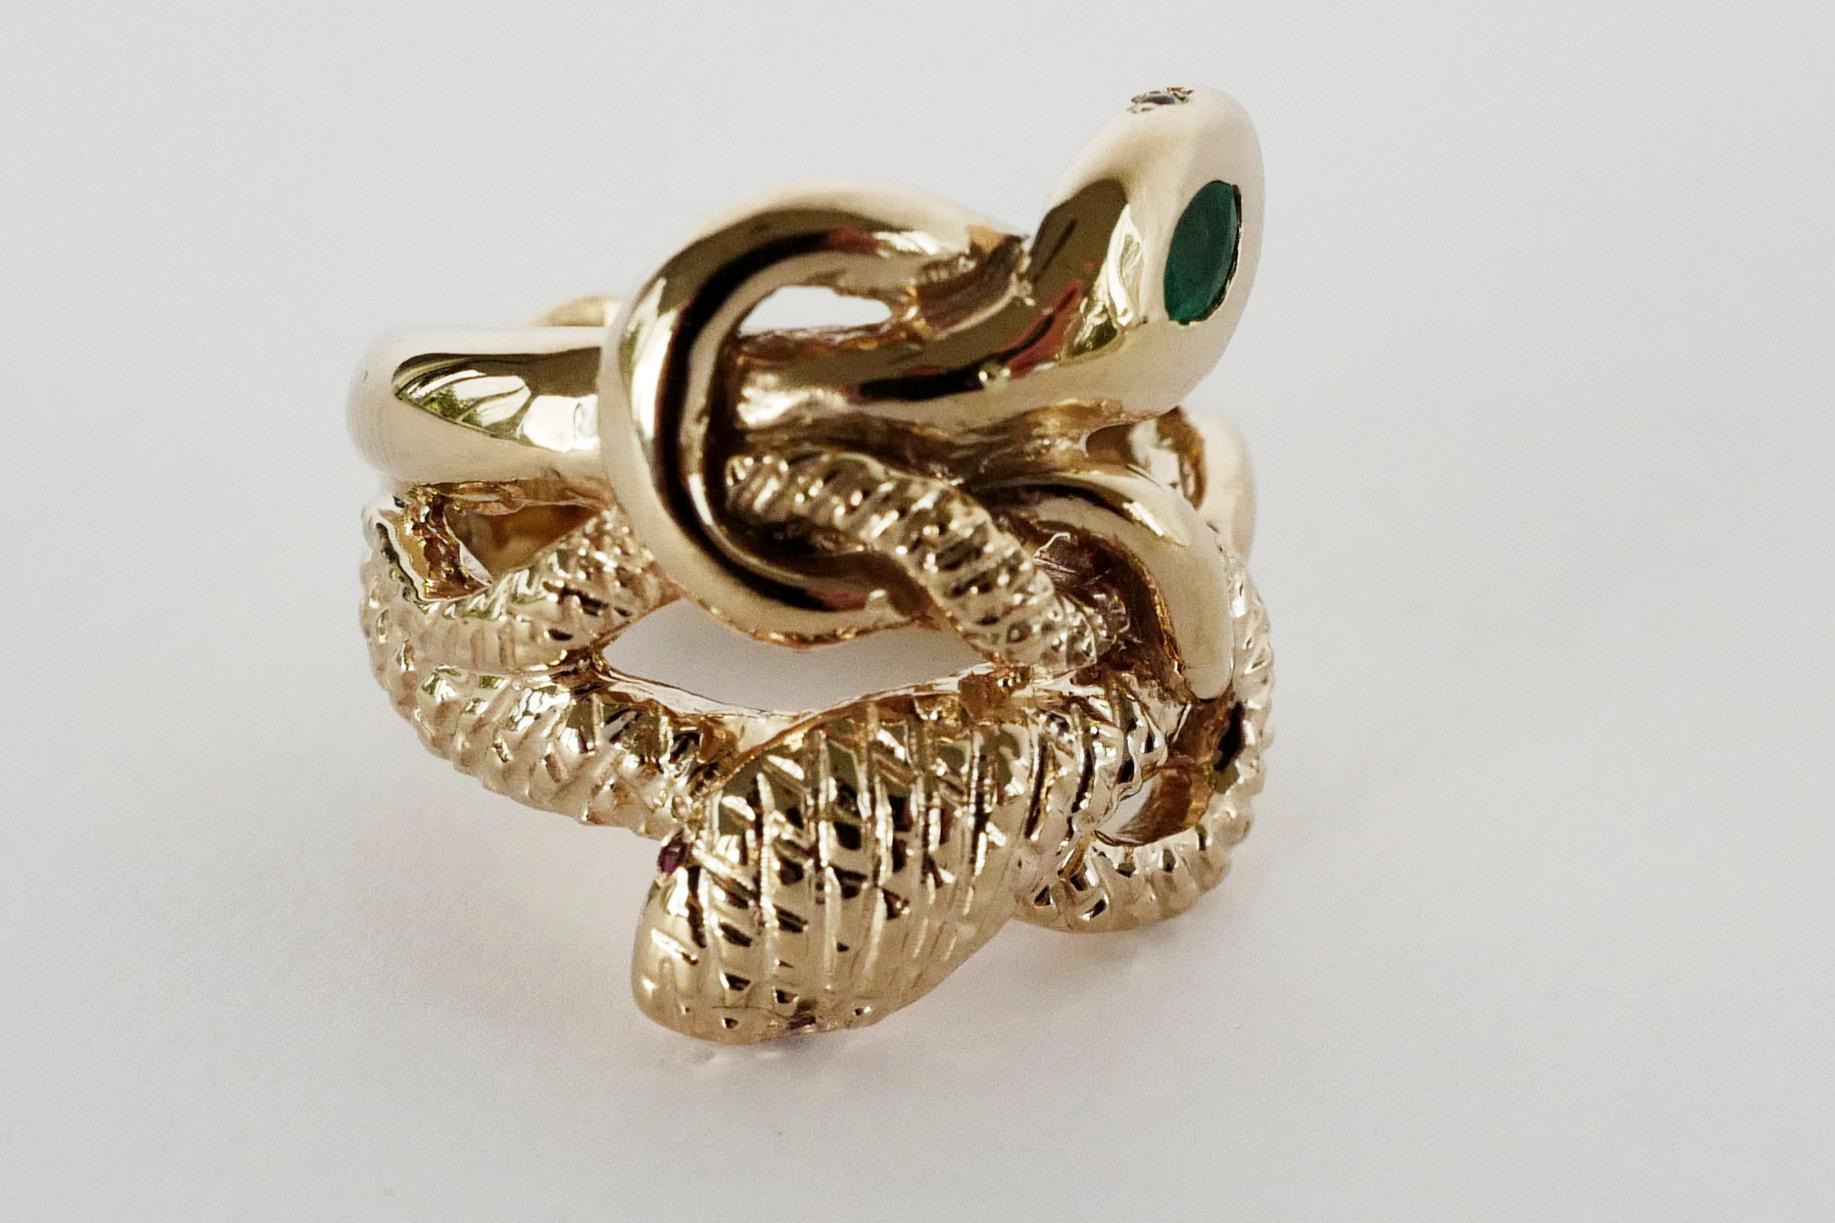 Emerald Snake Ring Ruby Aquamarine Eyes Bronze Victorian Style J Dauphin For Sale 1